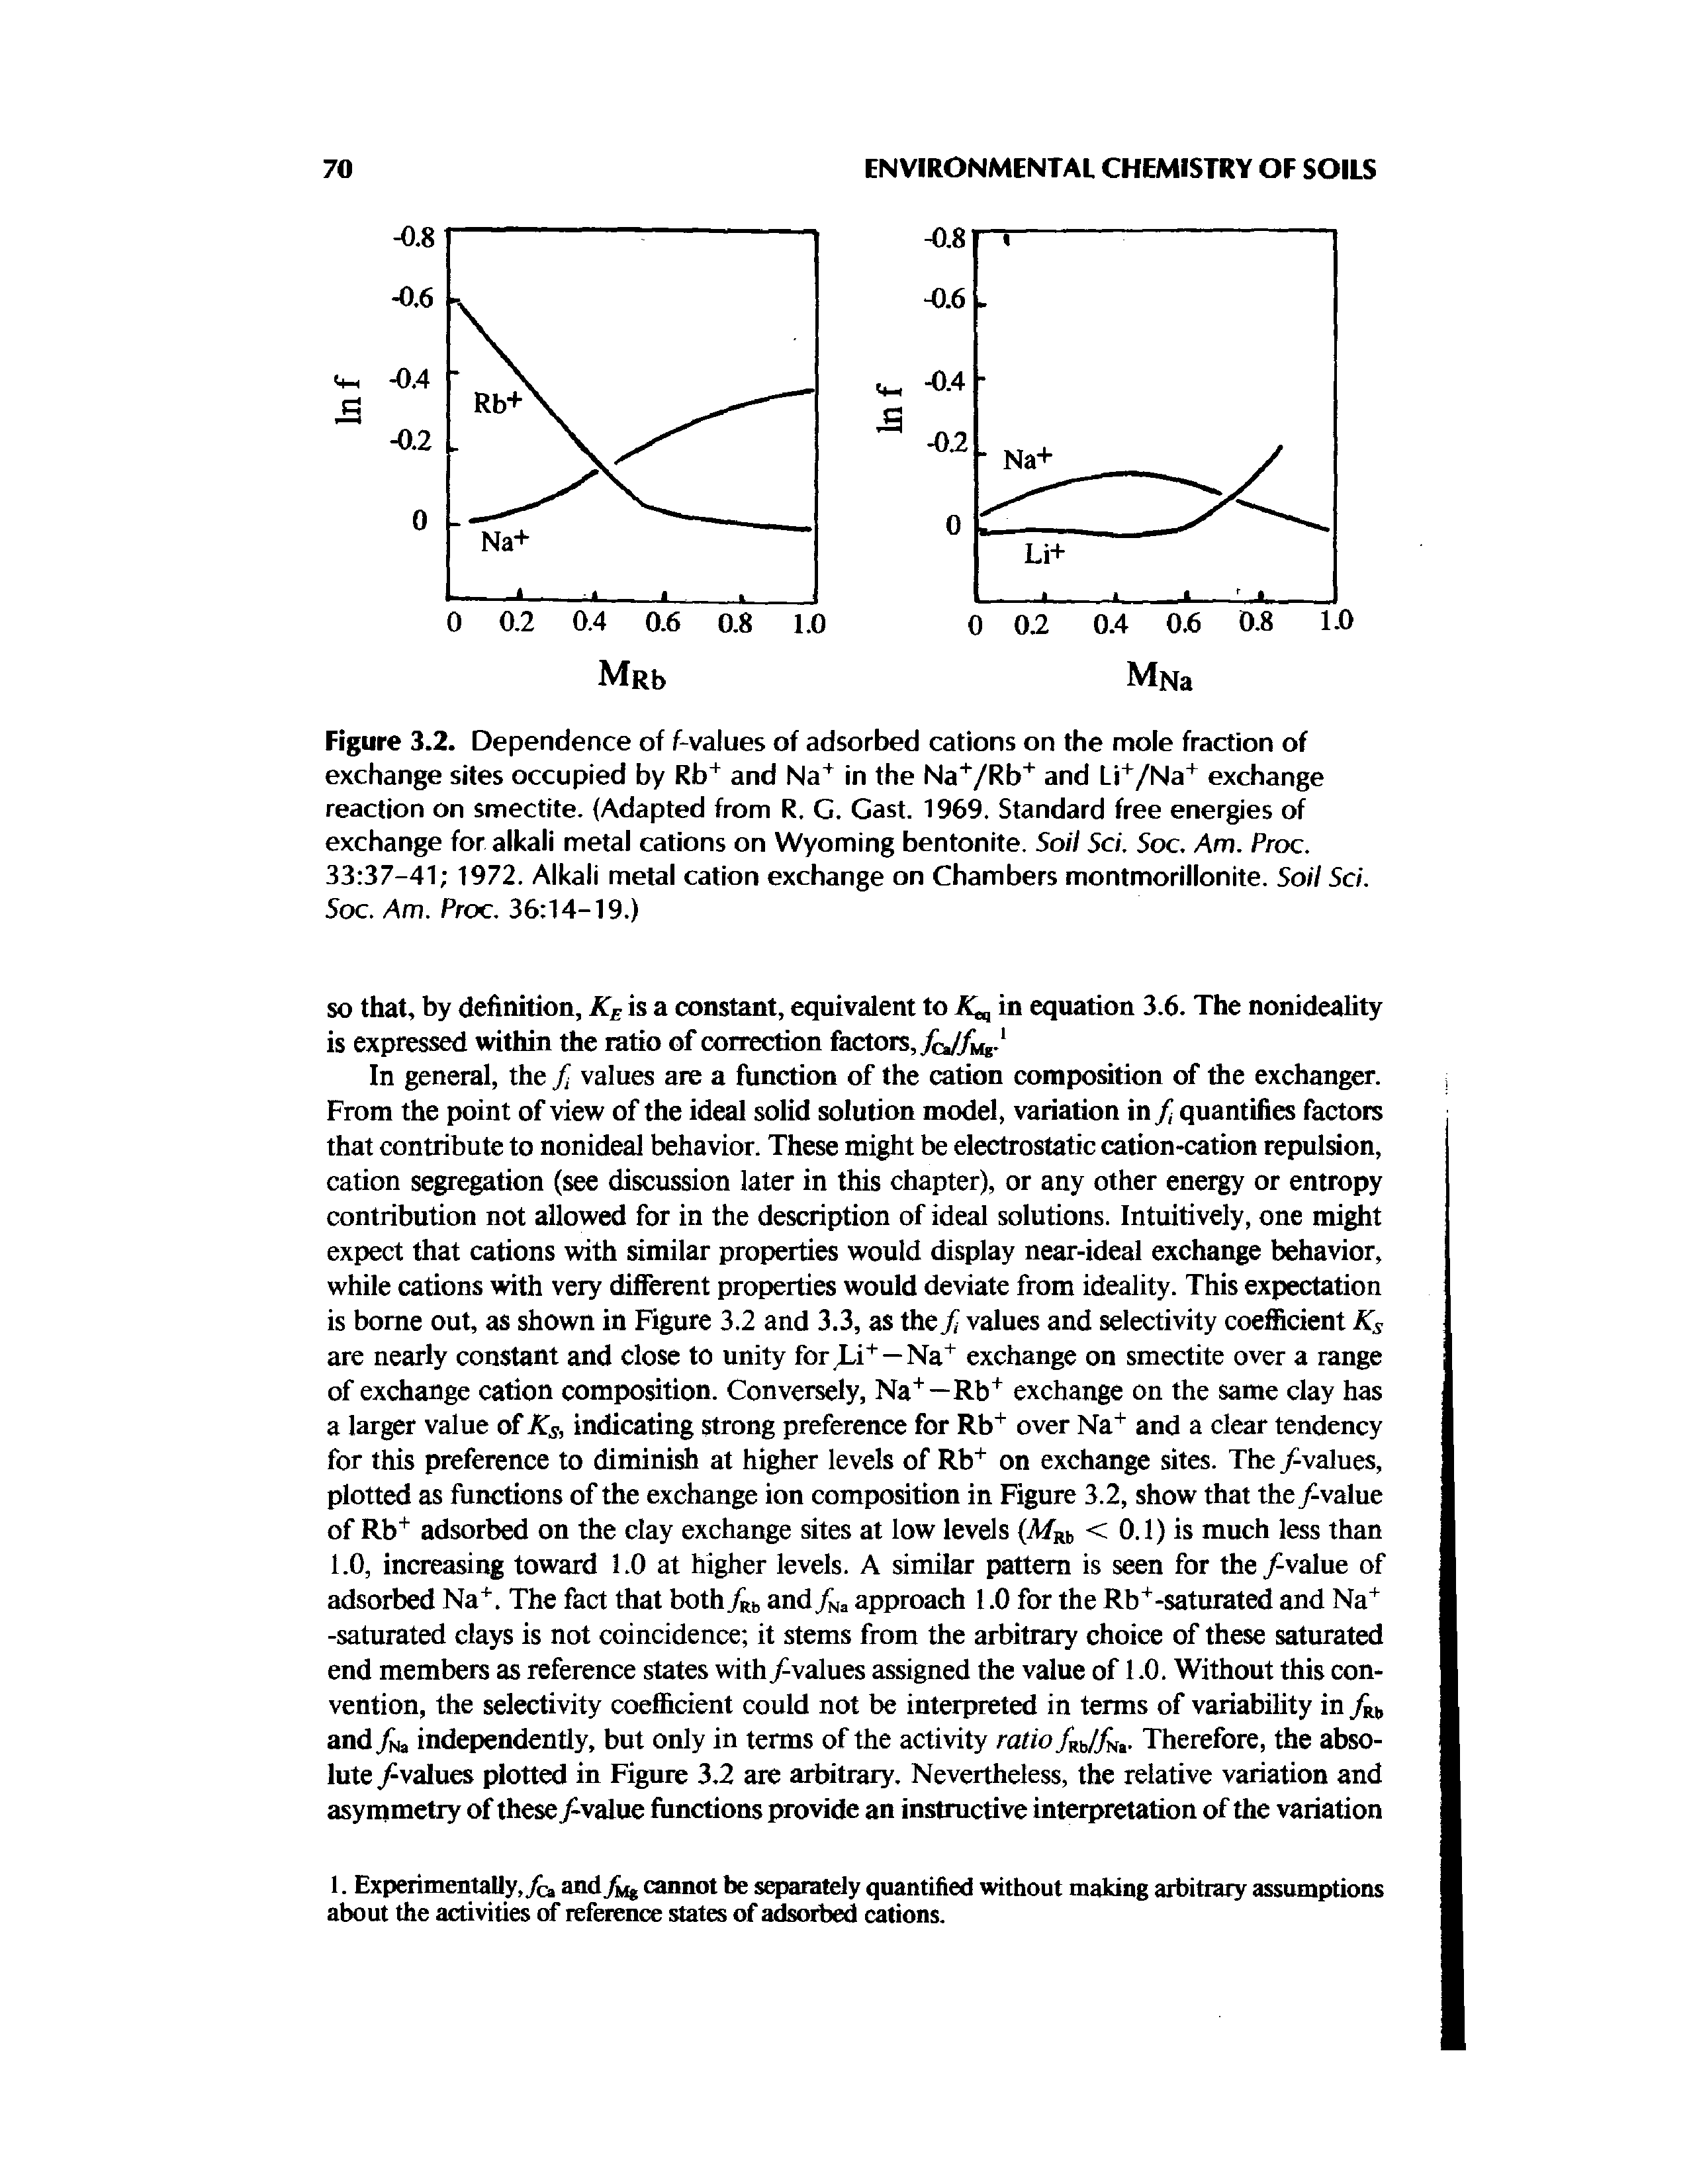 Figure 3.2. Dependence of f-values of adsorbed cations on the mole fraction of exchange sites occupied by Rb and Na in the NaV b and Li+/Na+ exchange reaction on smectite. Adapted from R. G. Cast. 1969. Standard free energies of exchange for alkali metal cations on Wyoming bentonite. Soil Sci. Soc. Am. Proc. 33 37-41 1972. Alkali metal cation exchange on Chambers montmorillonite. Soil Sci. Soc. Am. Proc. 36 14-19.)...